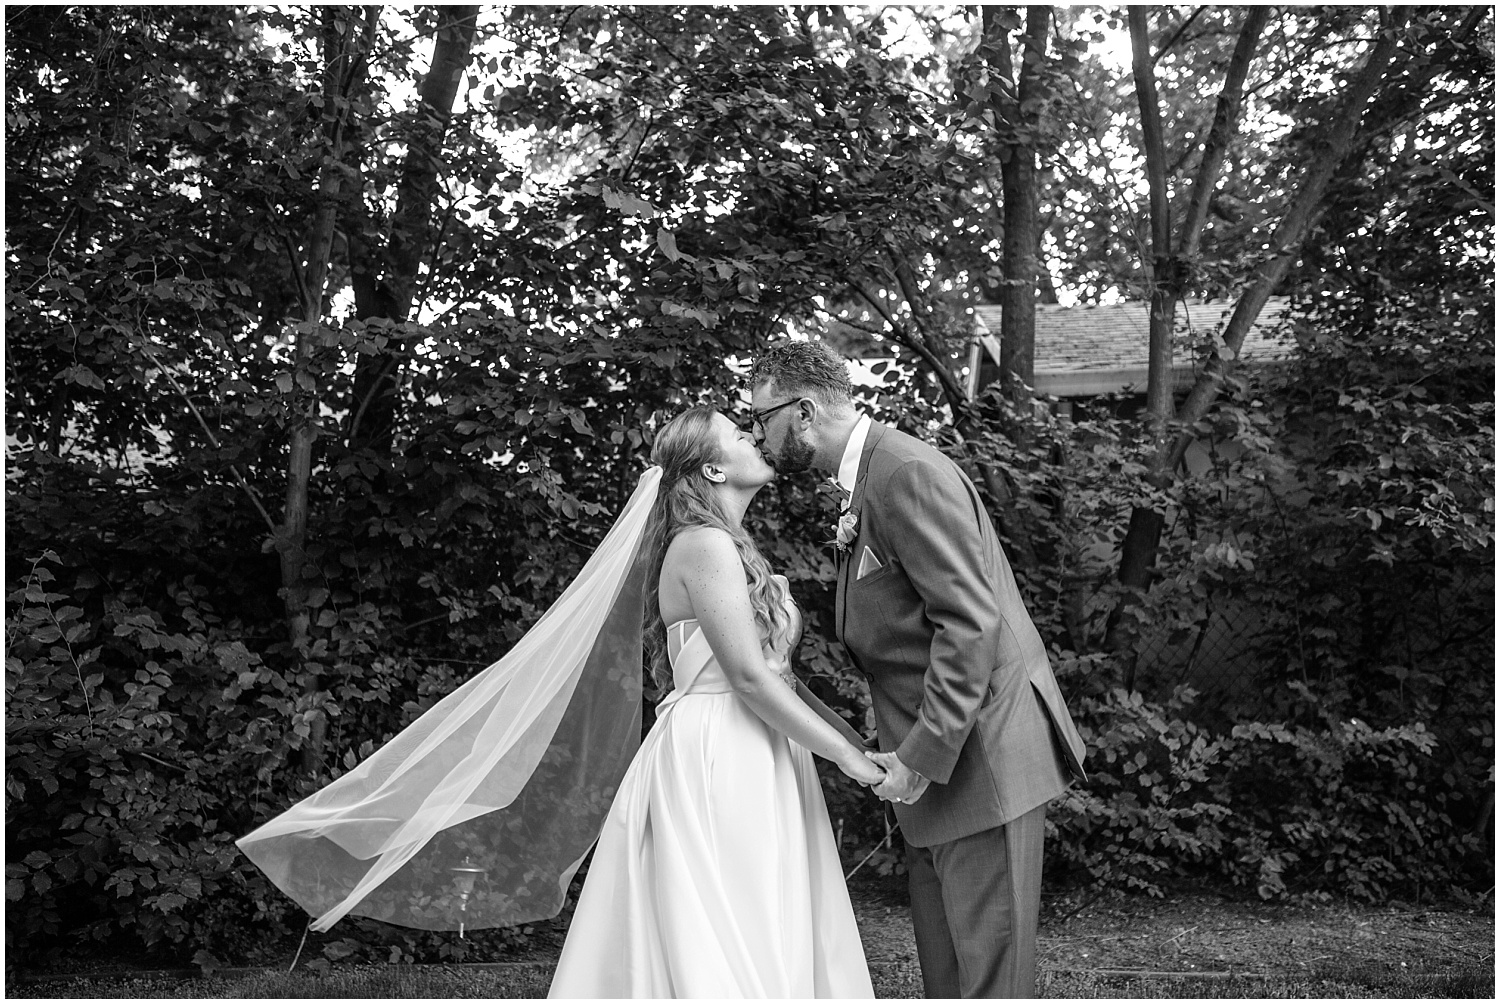 Bride and groom kiss as veil blows in the wind